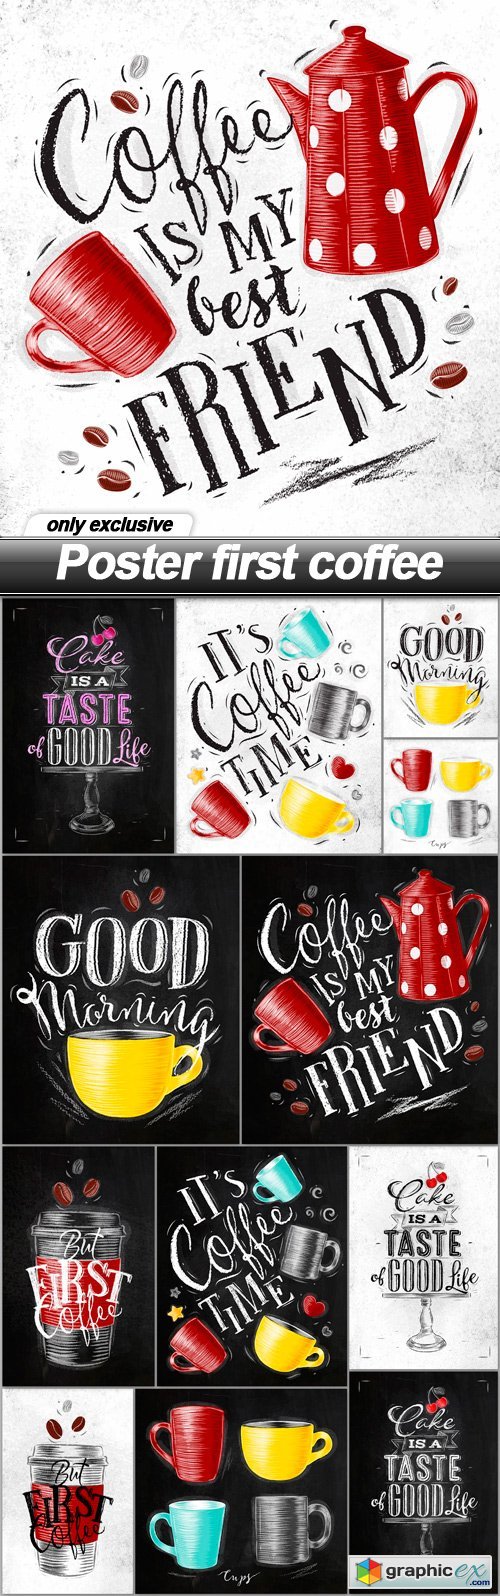 Poster first coffee - 13 EPS